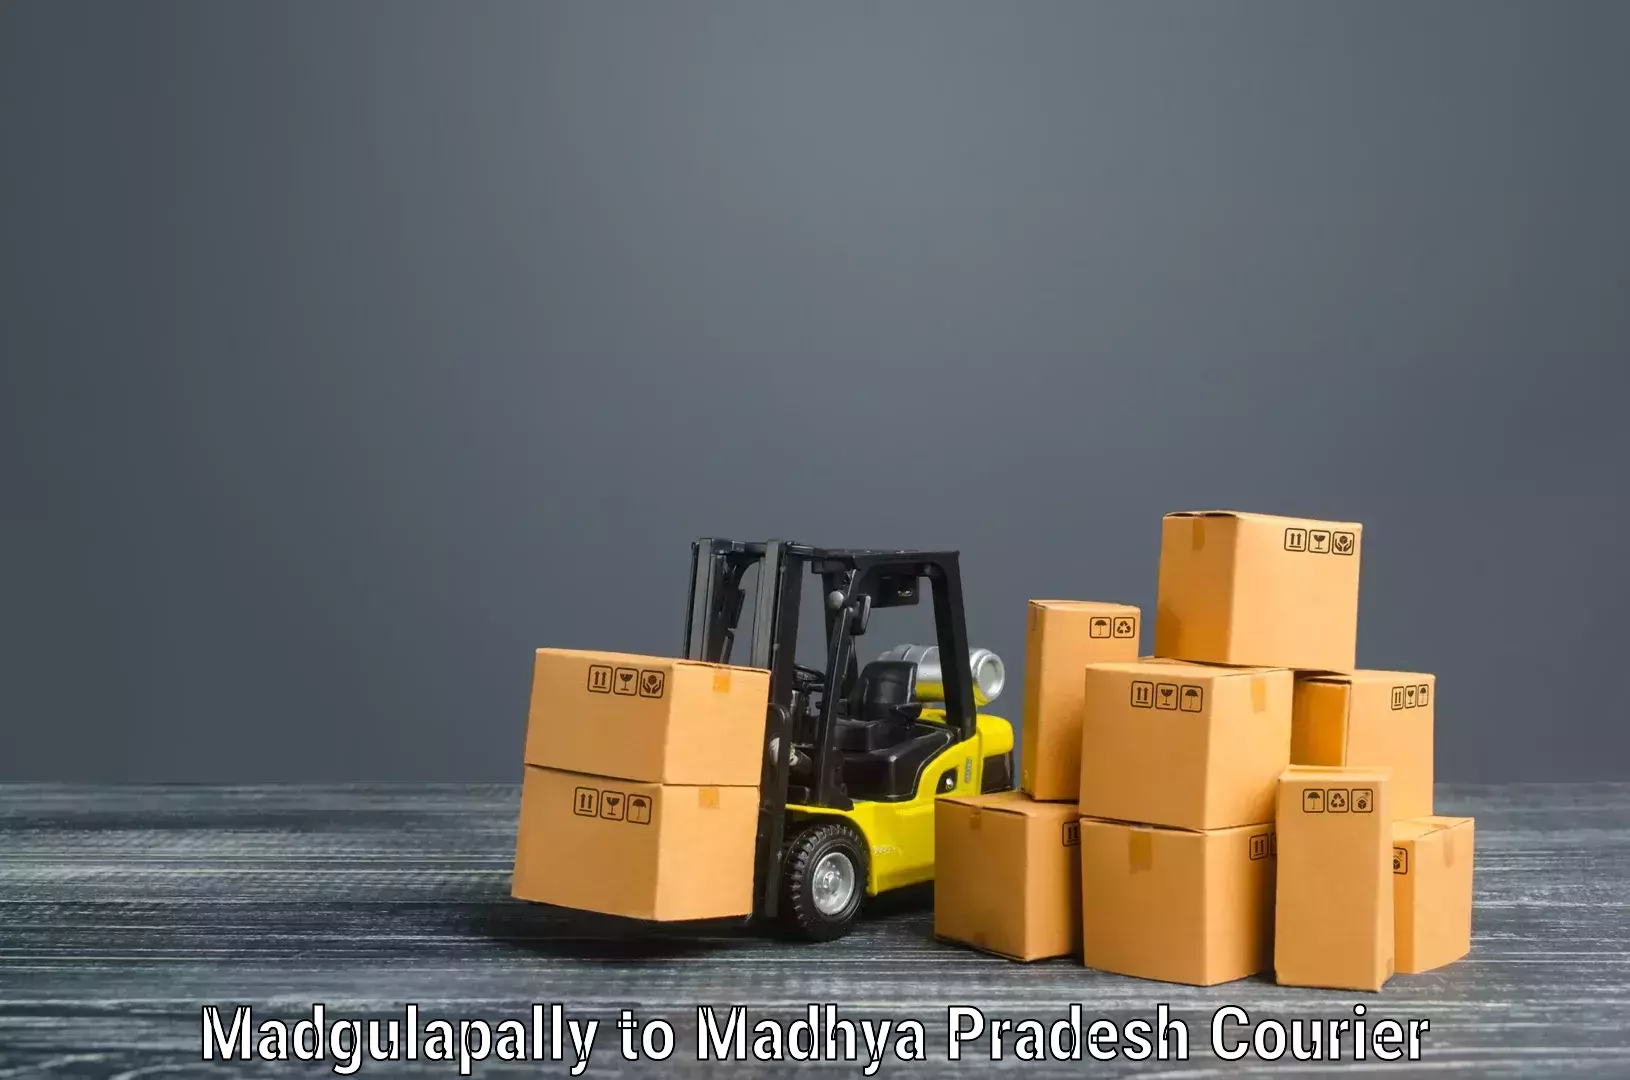 Expert goods movers in Madgulapally to Jirapur